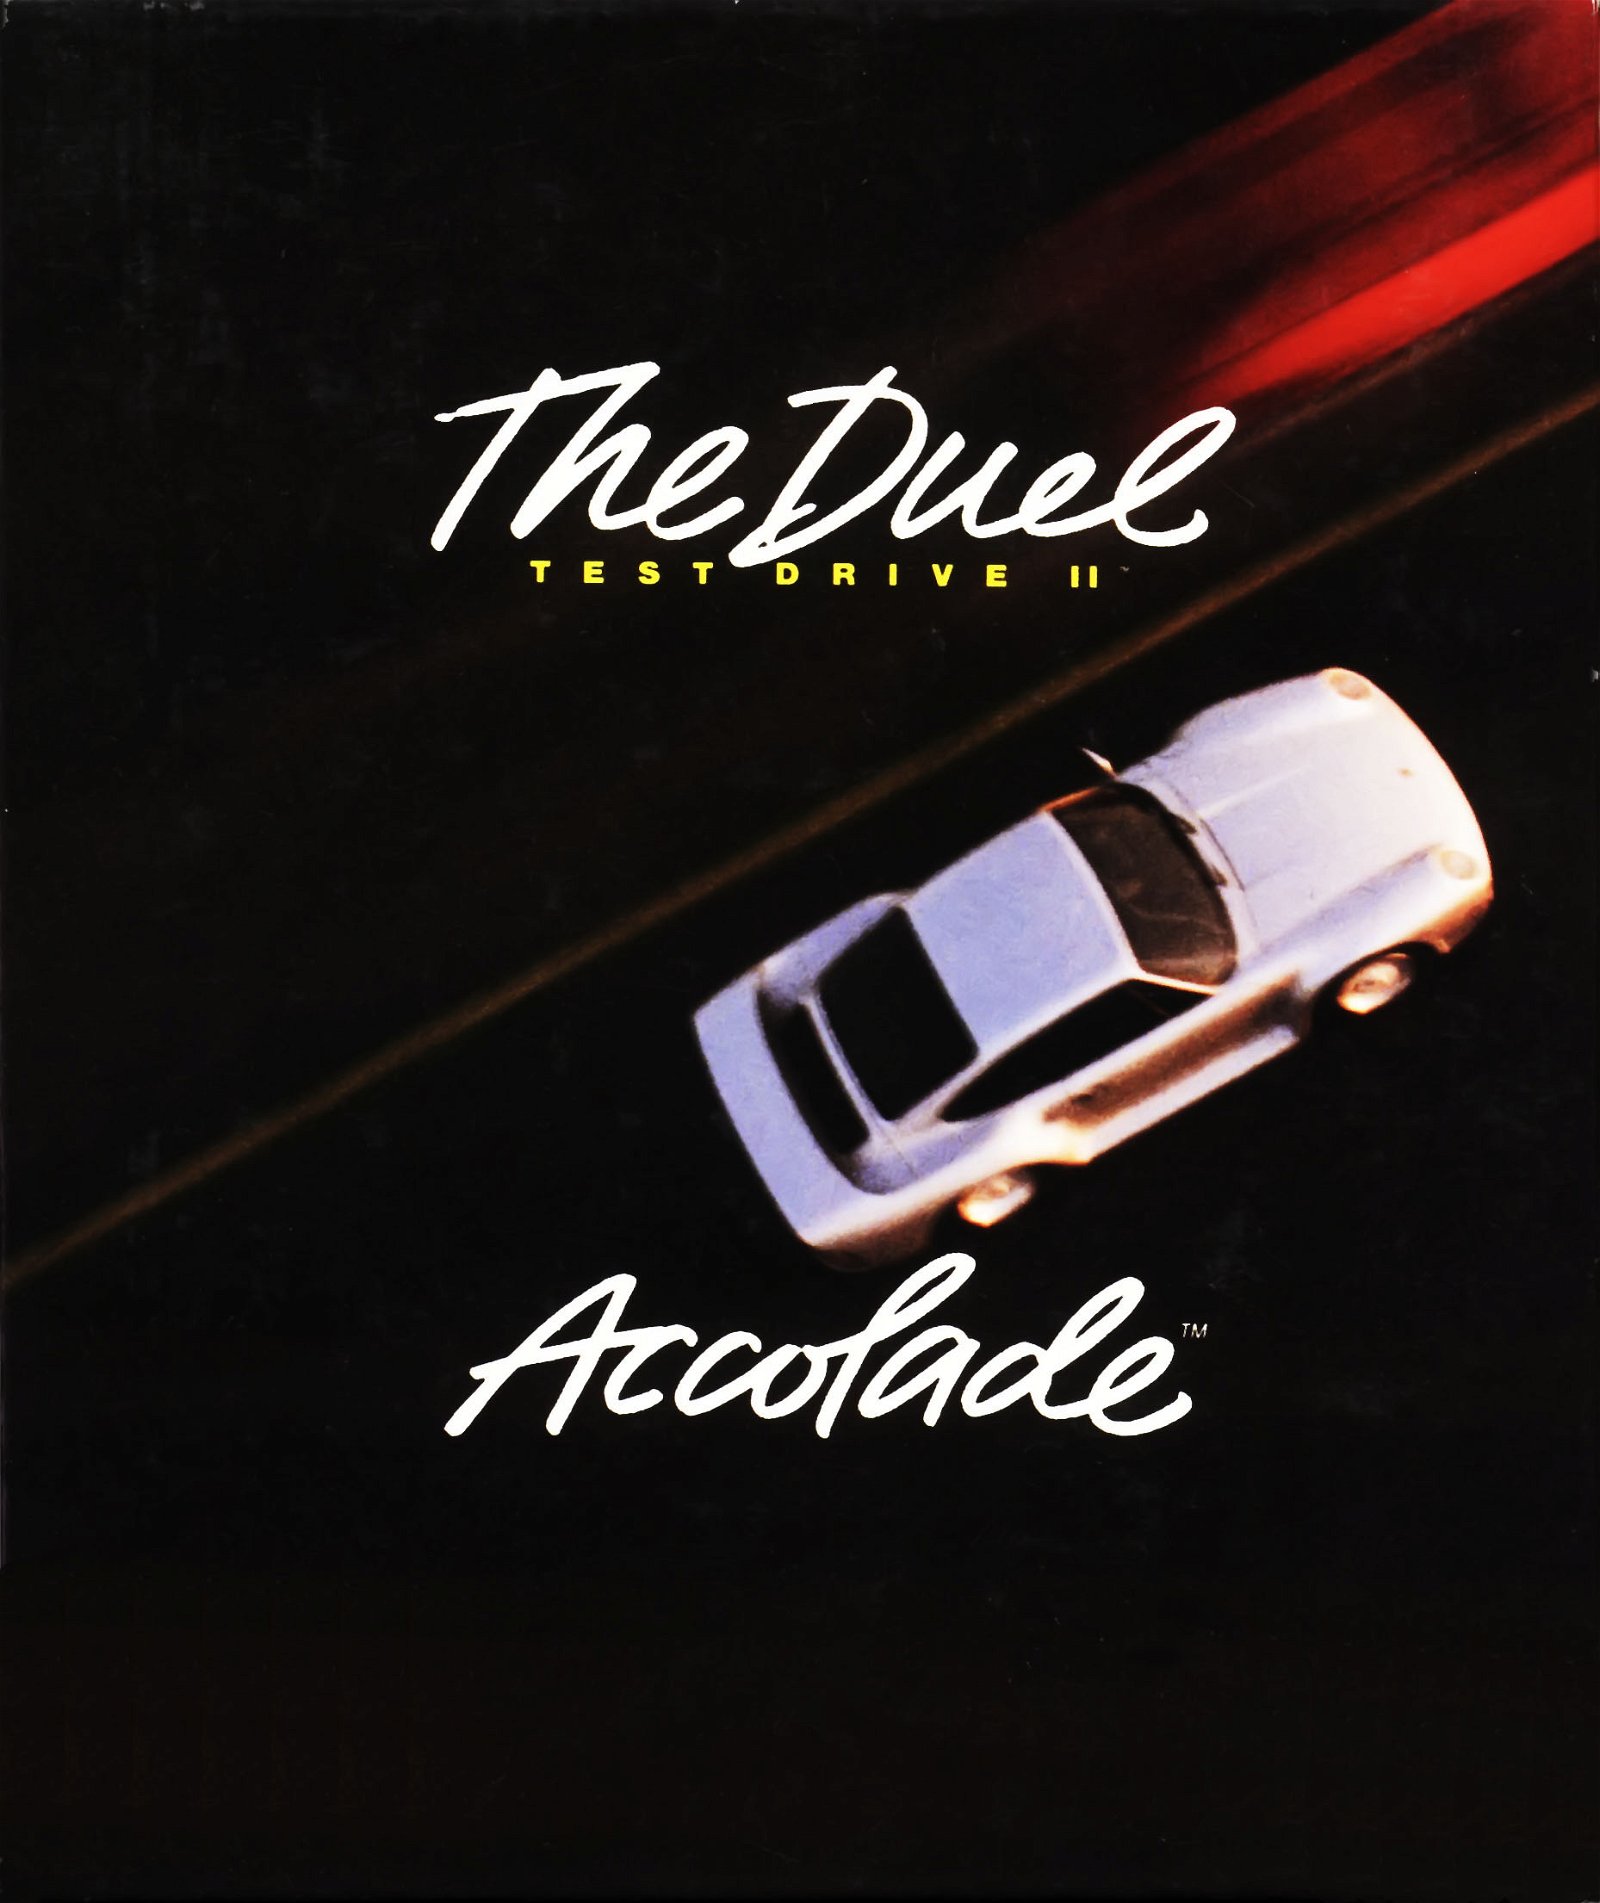 Image of The Duel: Test Drive II